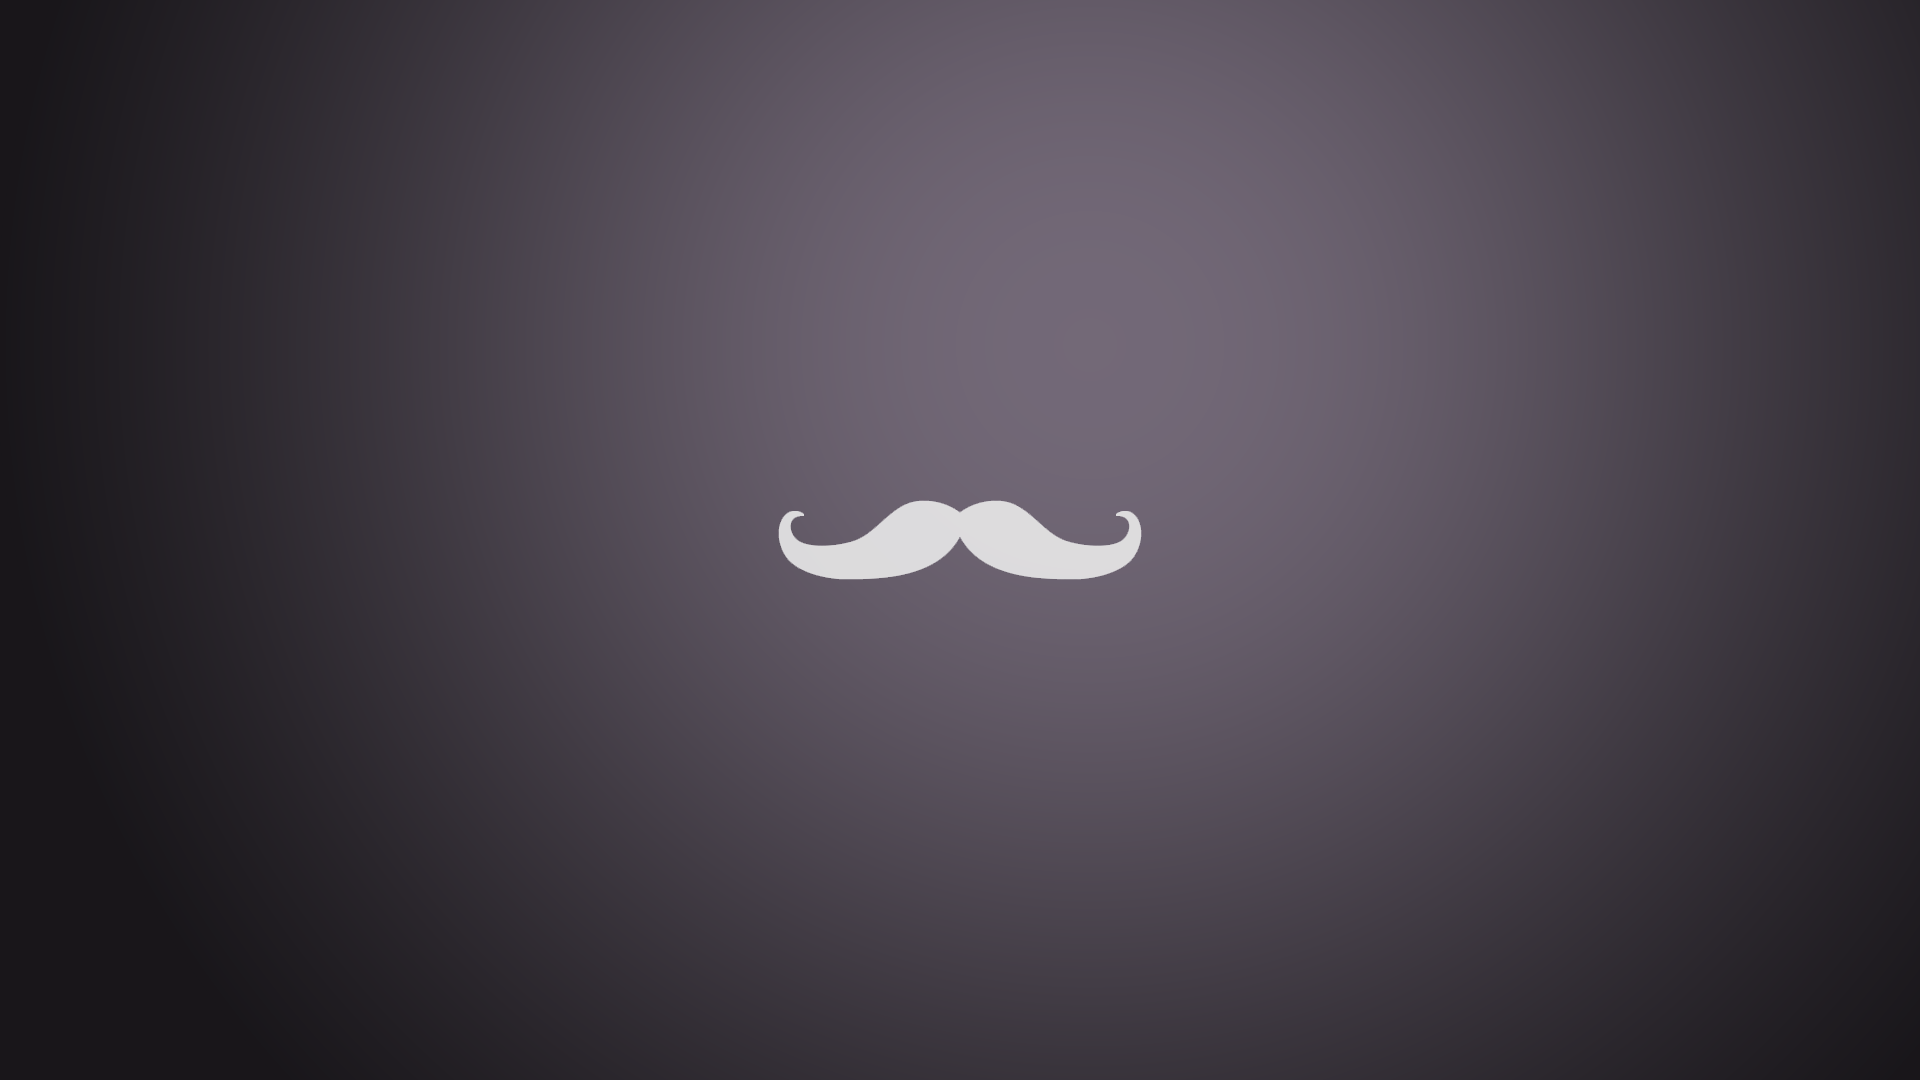 Weekly Wallpaper Put Moustaches On Your Desktop In Honour Of Movember